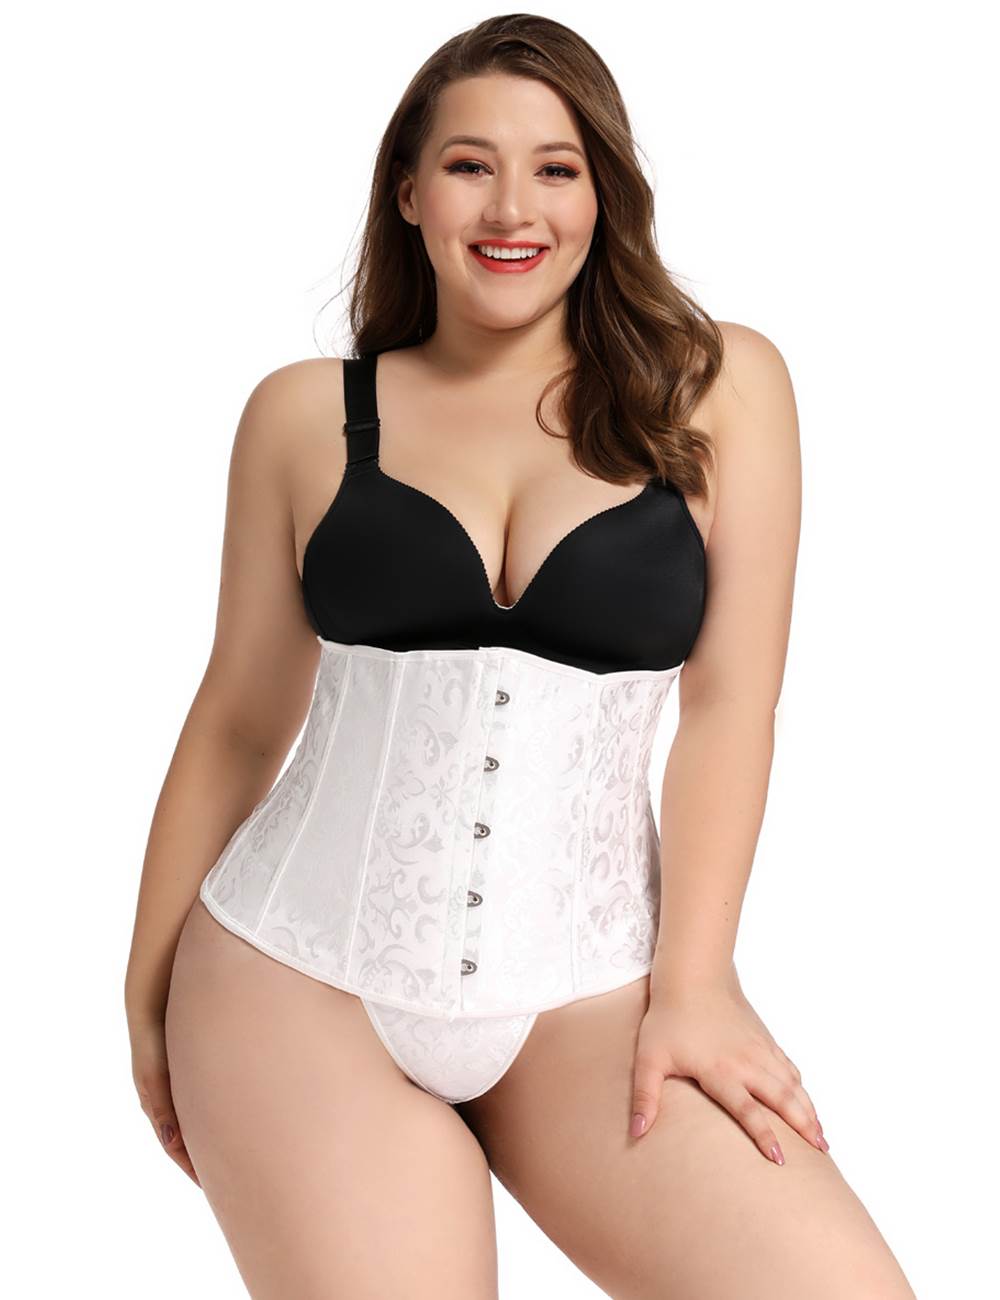 Brocade Underbust Corset and Thong 70552 - White